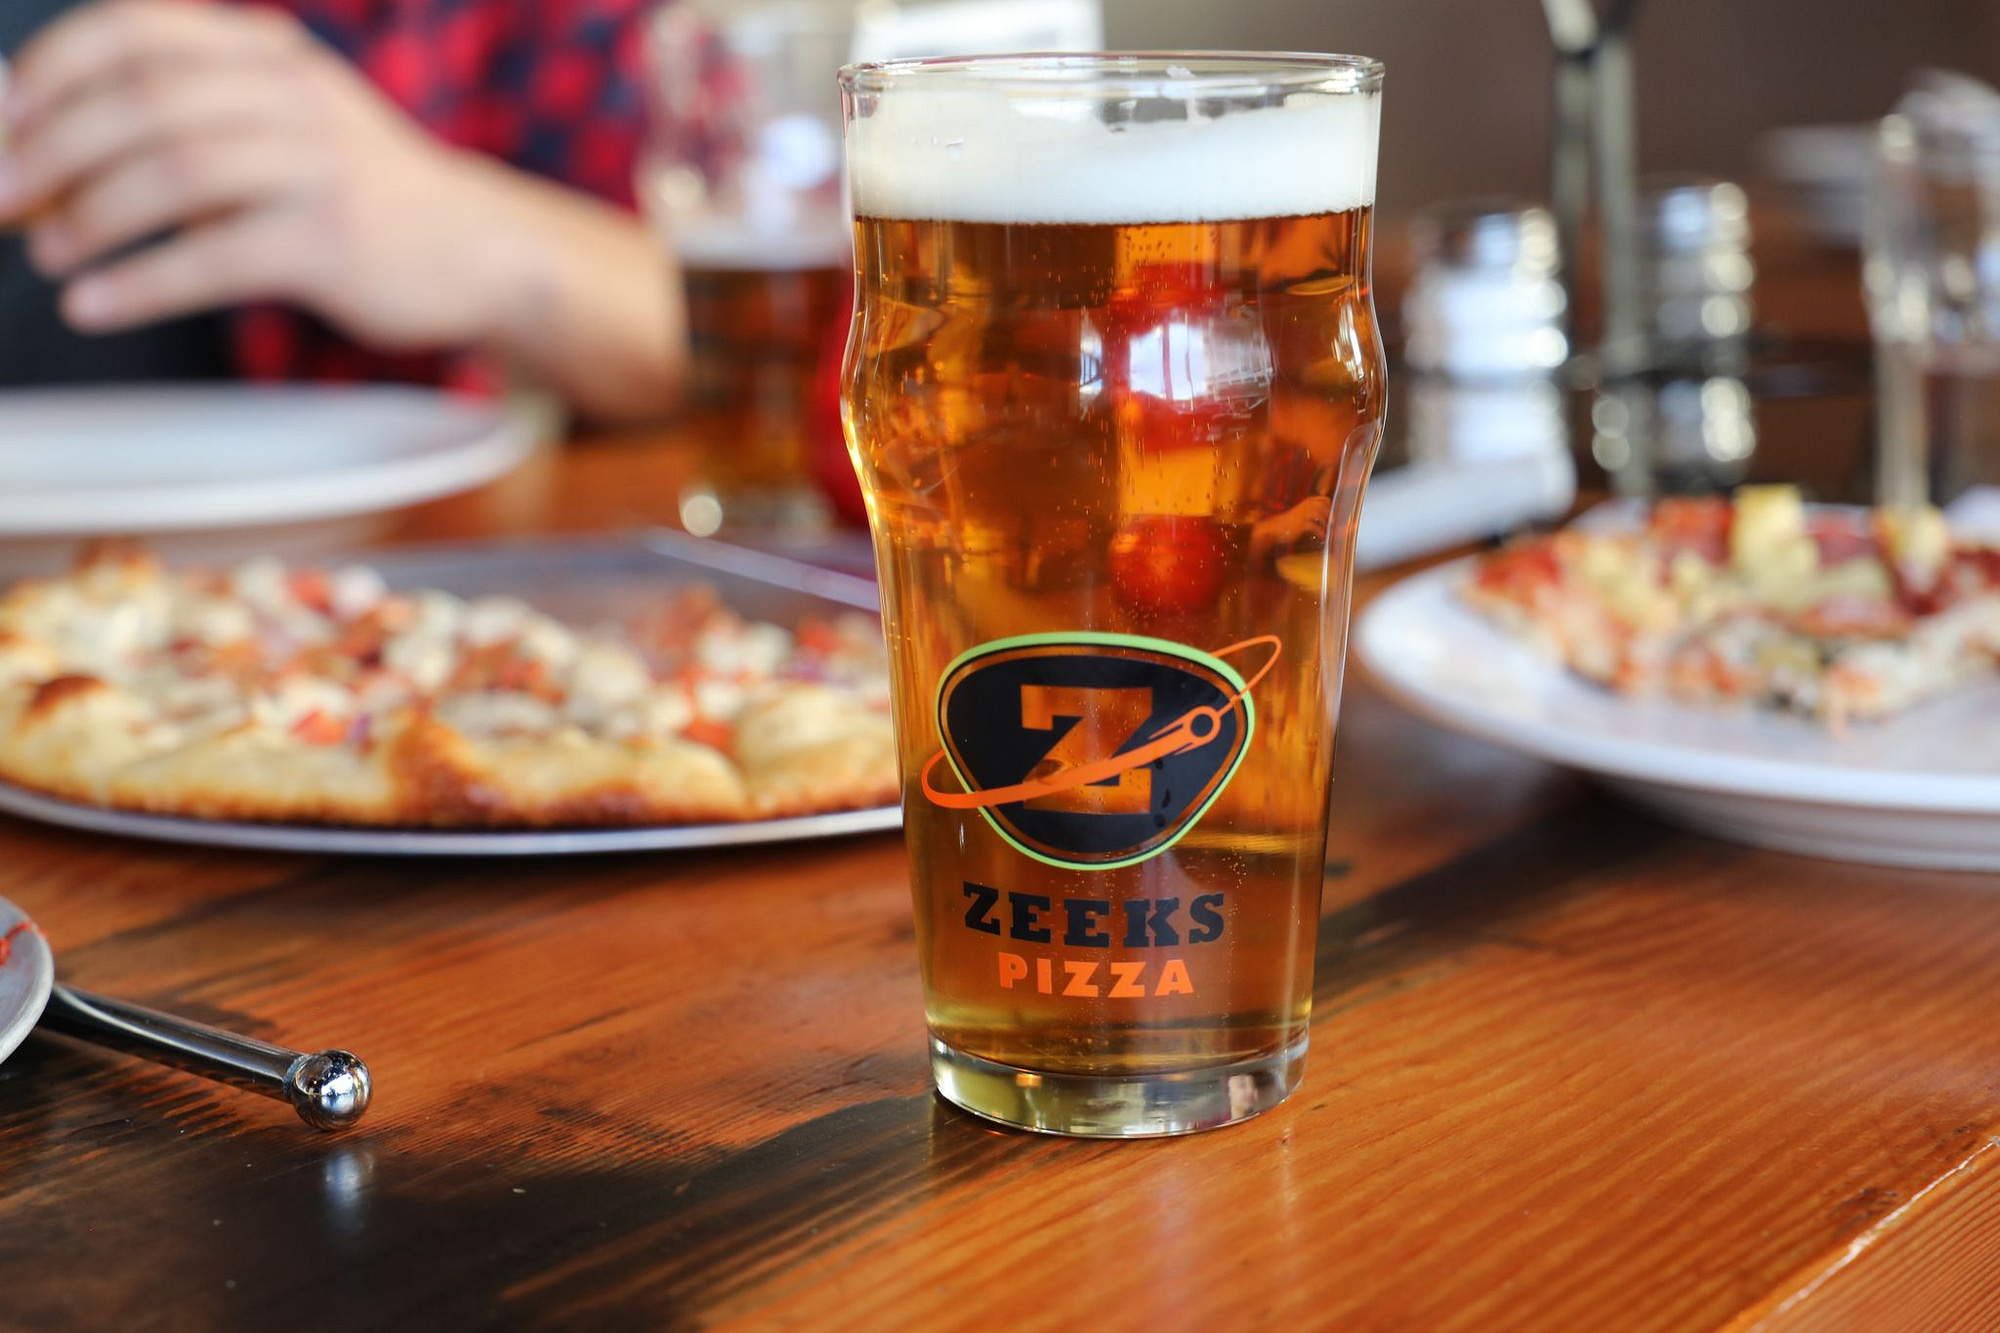 A full glass of tasty looking beer served in a Zeeks Pizza pint glass